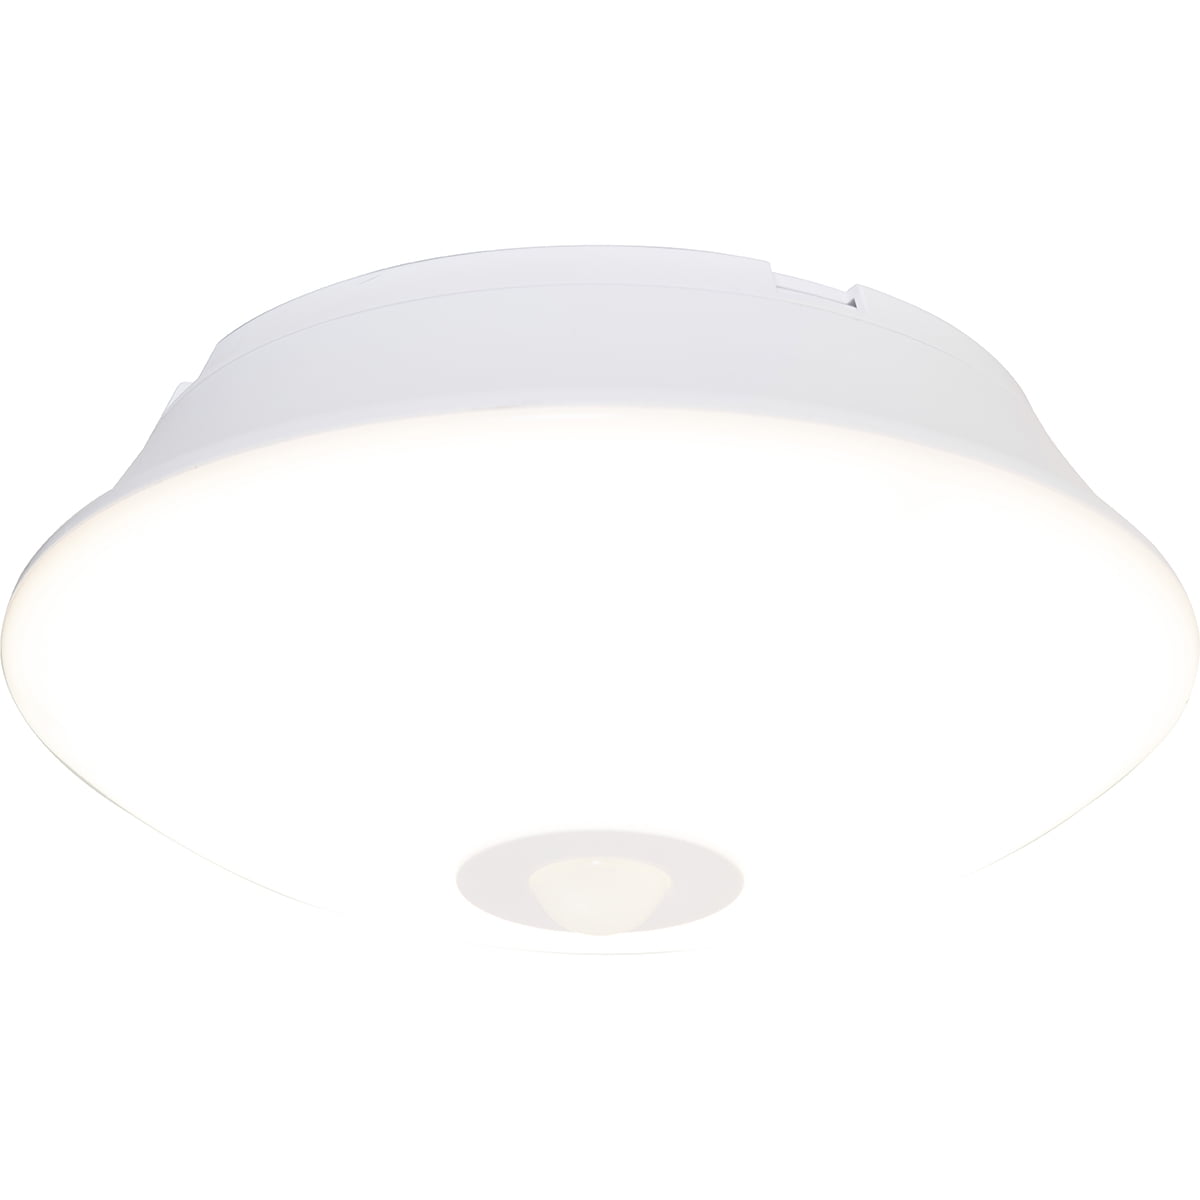 Details about   TOOWELL Motion Sensor Ceiling Light Battery Operated Indoor/Outdoor LED Ceiling